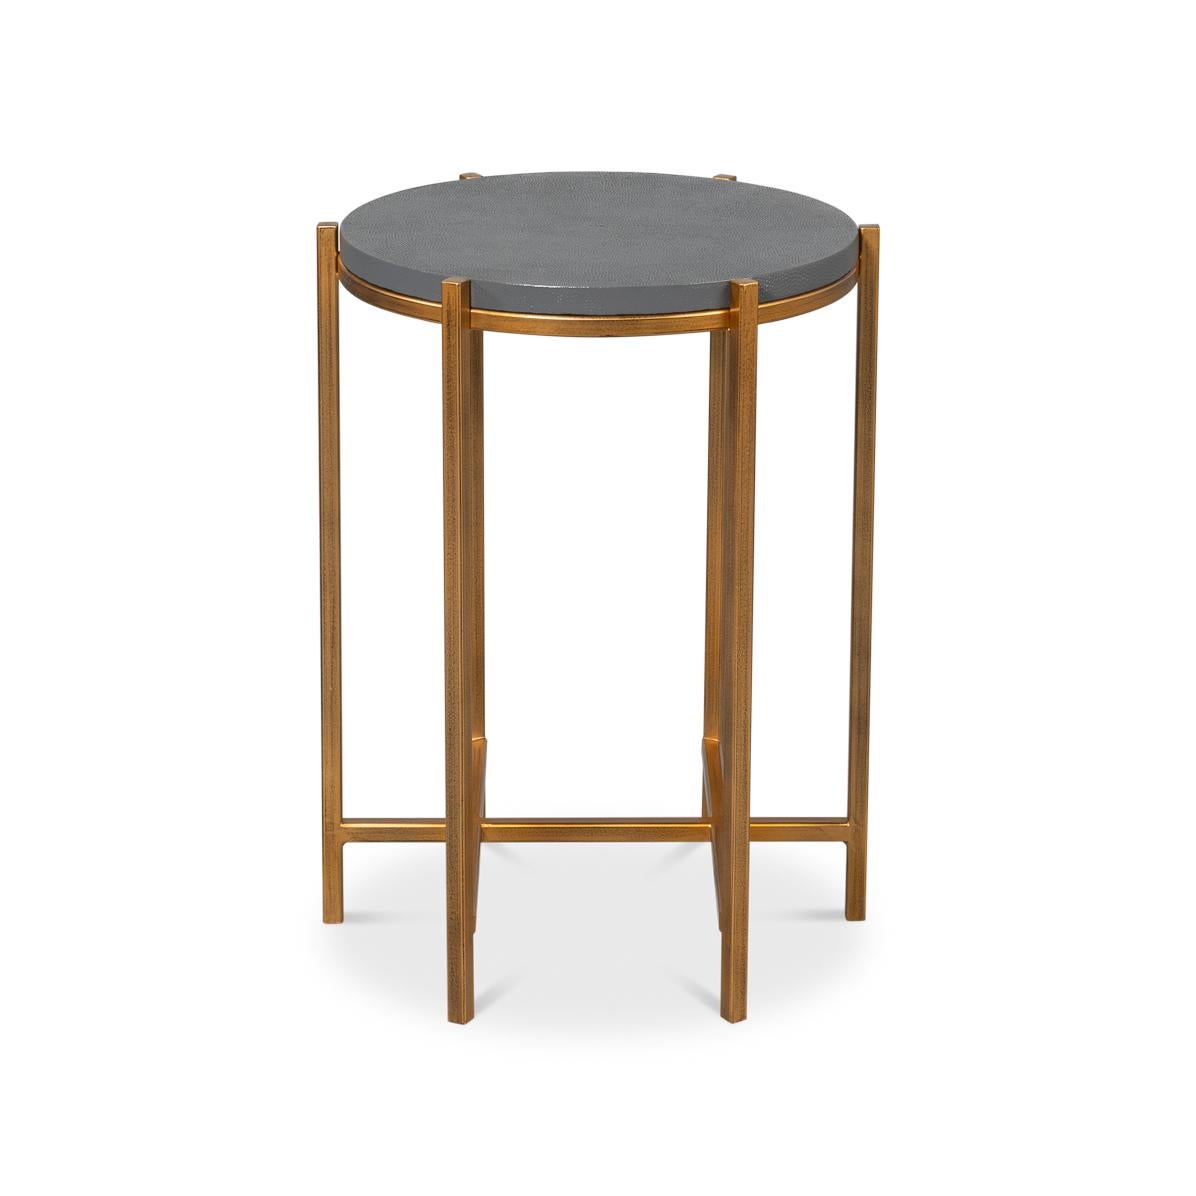 Where contemporary design meets sophisticated luxury. The table features a stunning leather-wrapped shagreen embossed round top in an elegant gray hue, creating a sleek and stylish surface.

Supported by a unique six-legged gilt metal base with a